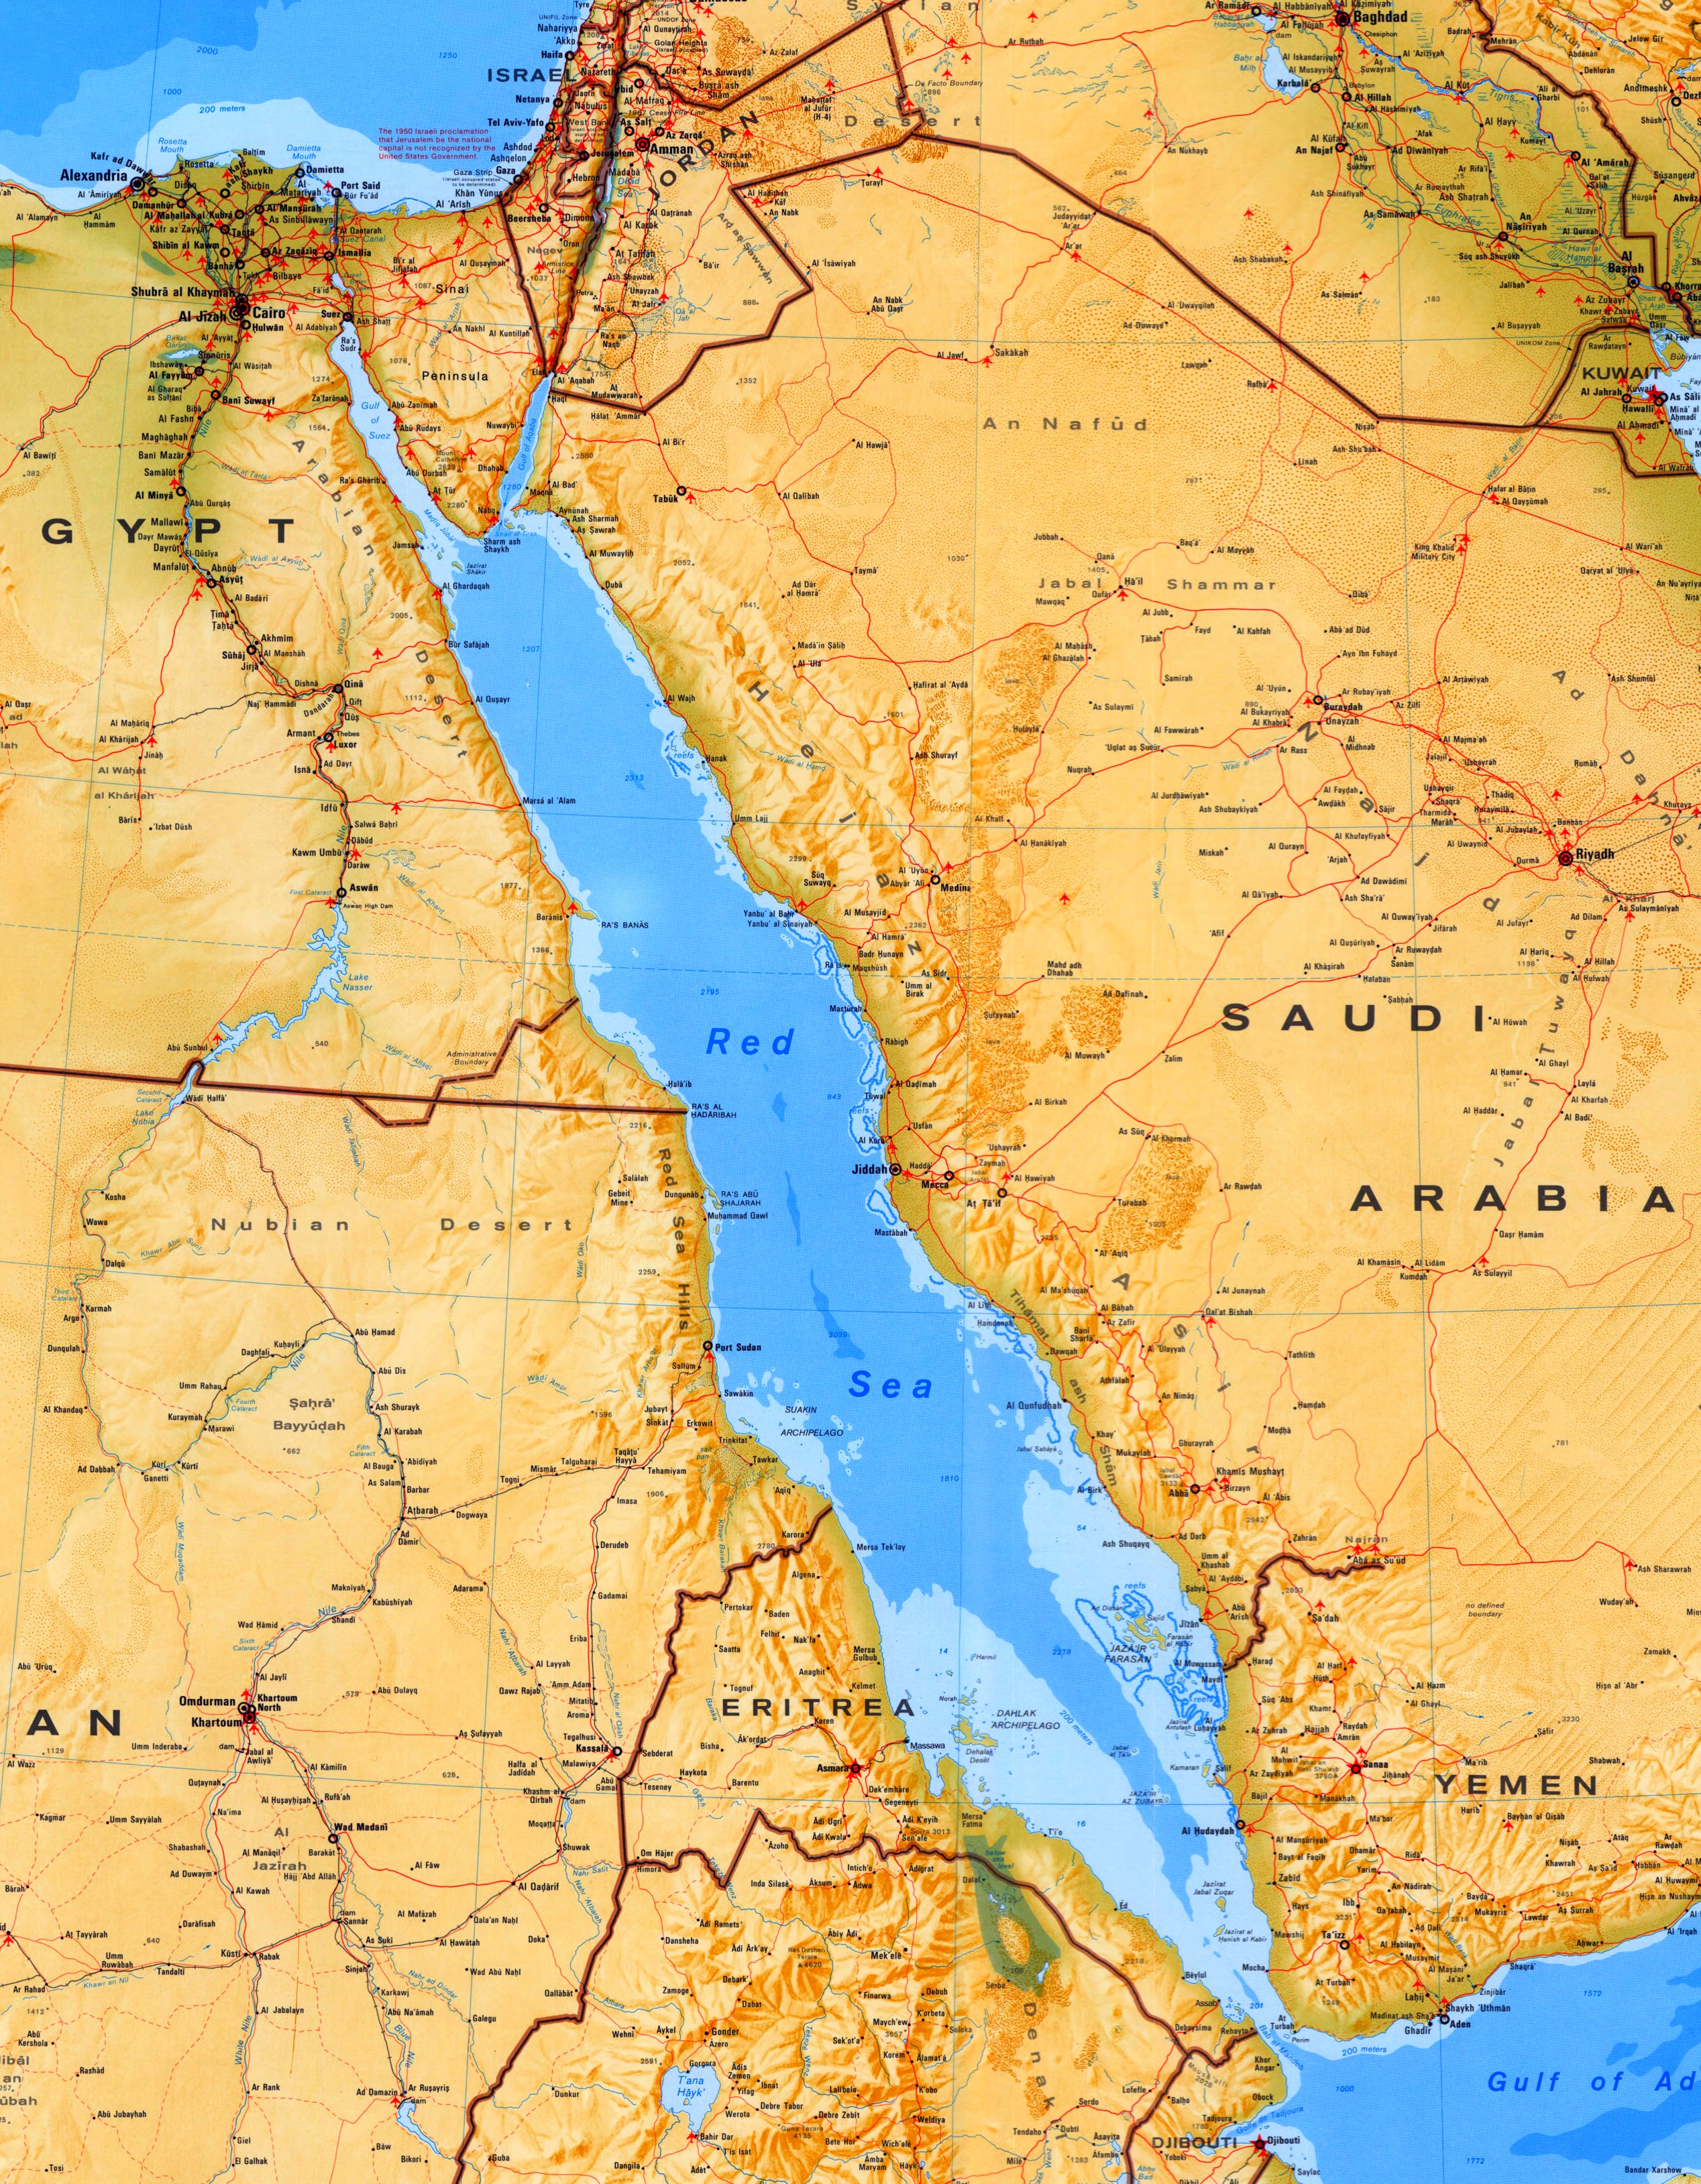 Red Sea Maps | Maps of Red Sea ﻿